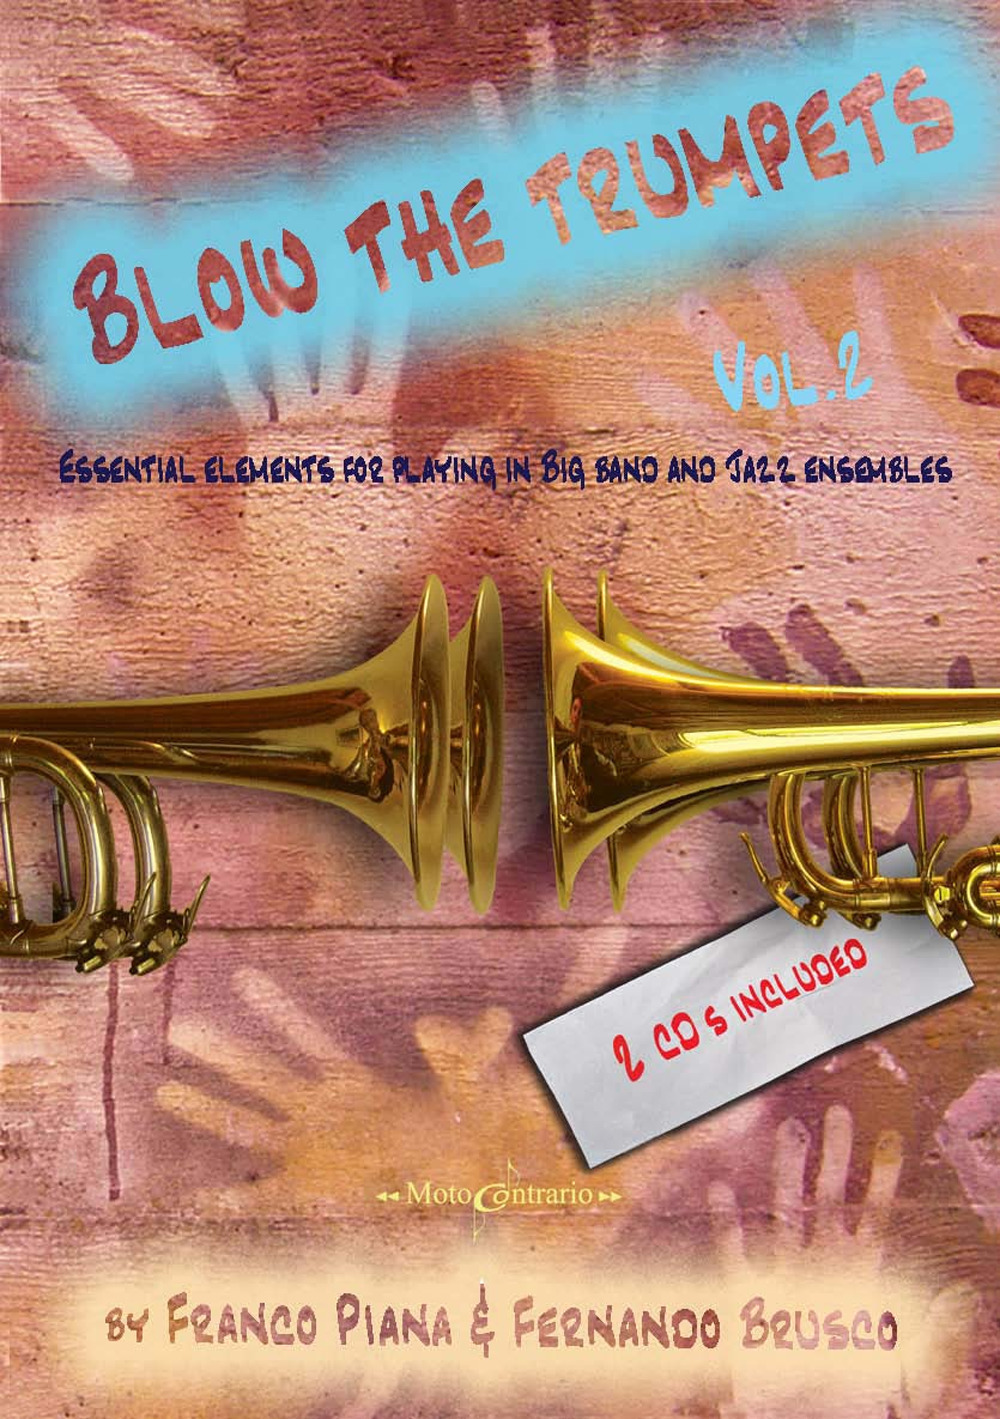 Blow the trumpets. Essential elements for playing in a big band and jazz ensamble. Con 2 CD-Audio. Vol. 2